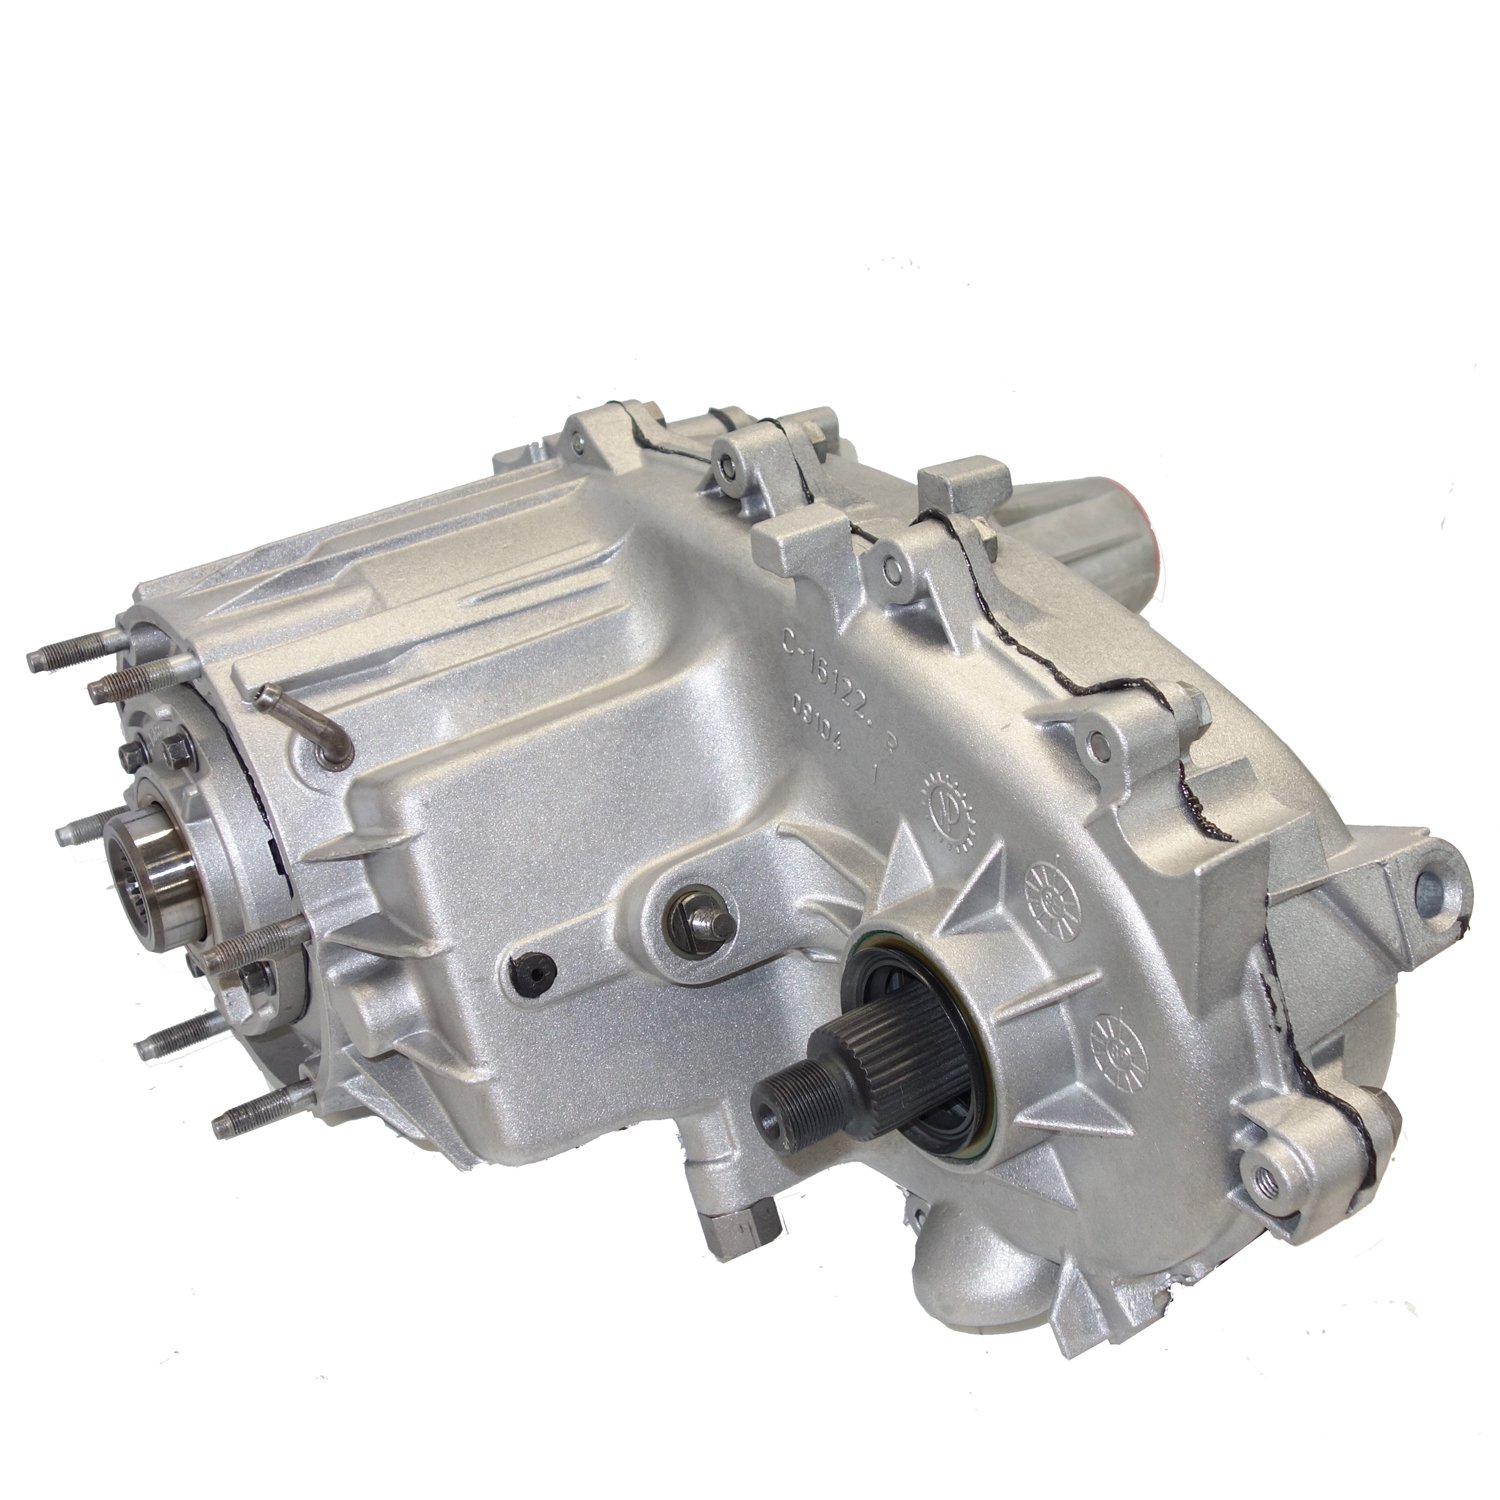 Remanufactured NP242 Transfer Case for Jeep 97-01 Cherokee & Grand Cherokee